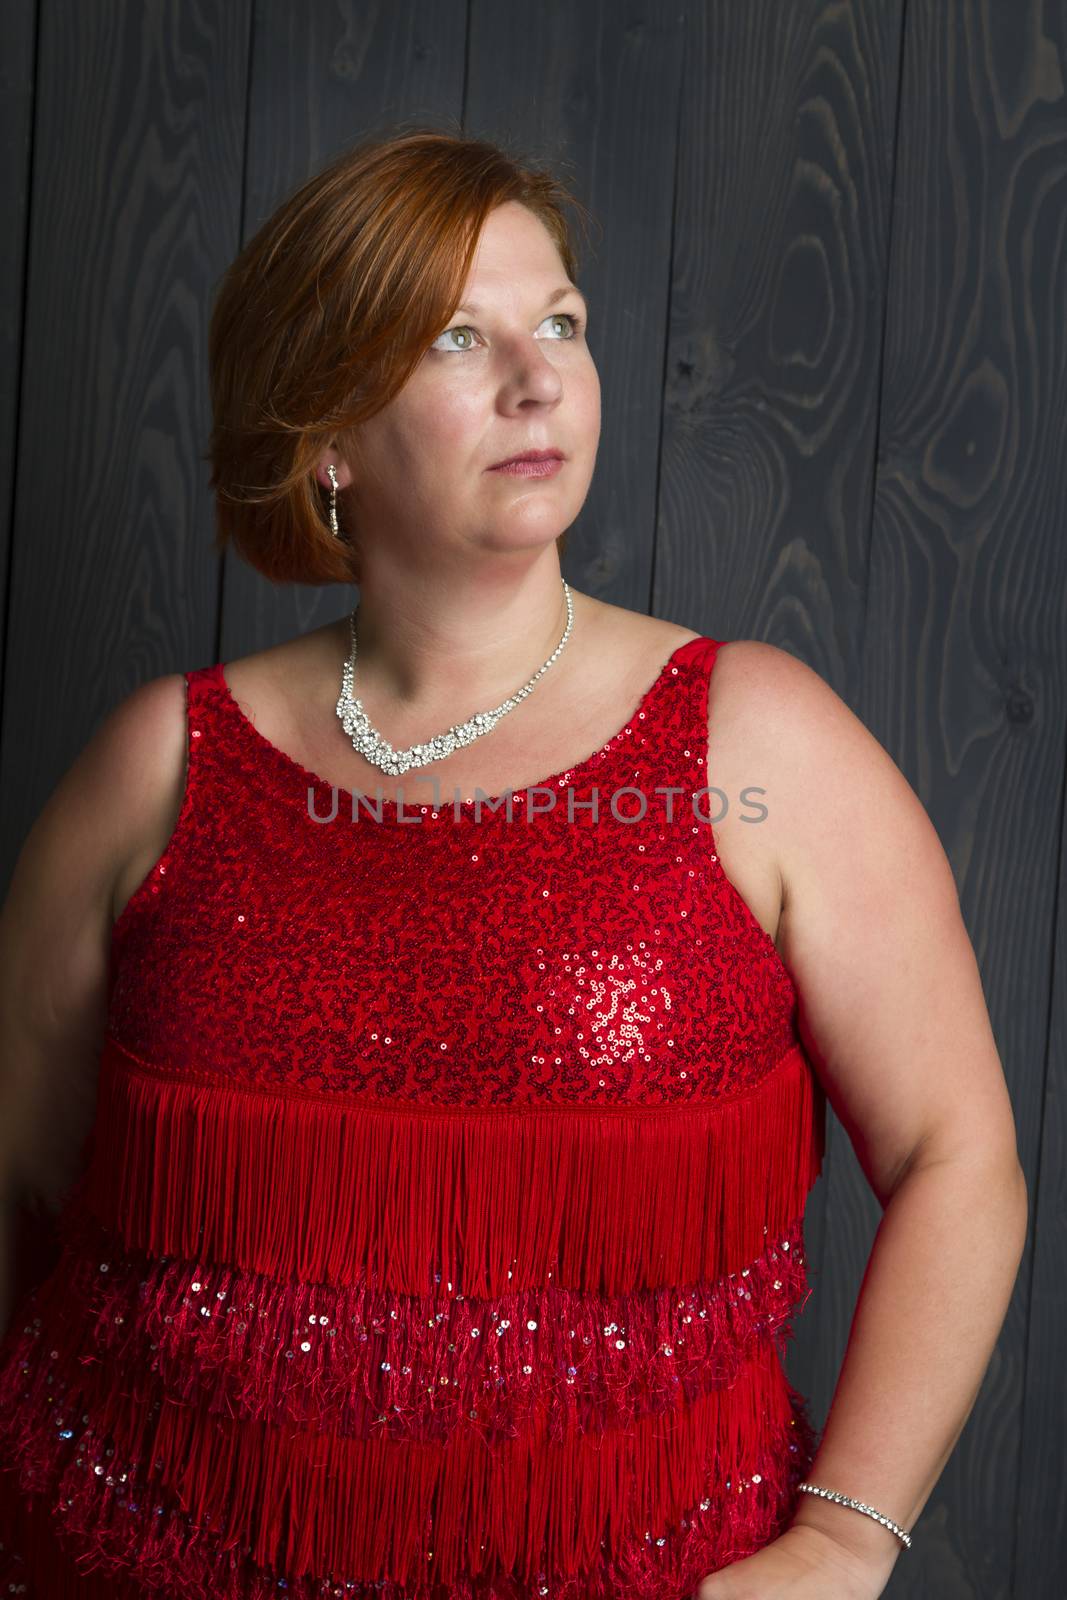 Woman in a sparkly dress by mypstudio